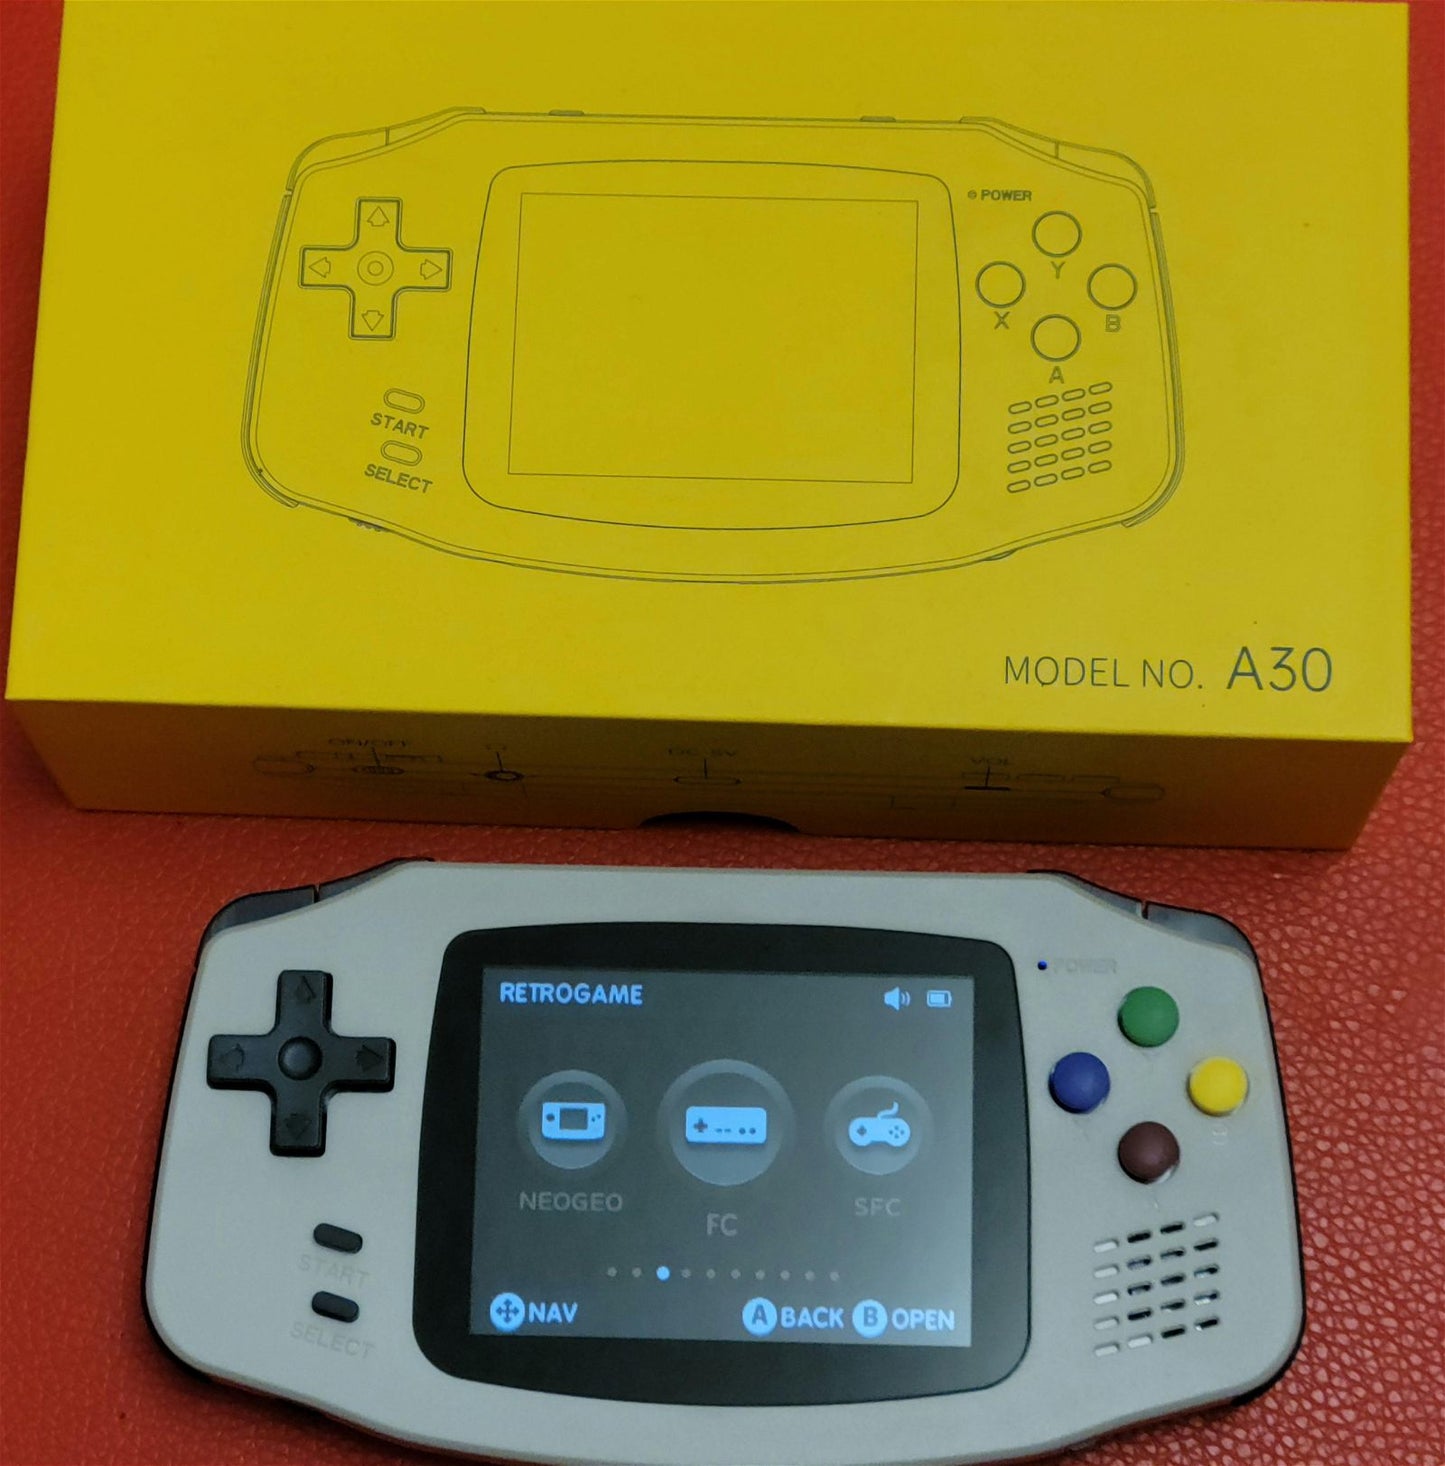 New powkiddy A30 ultra portable retro handheld gaming console, GBA design, 32GB plug and play - Arcadeclassics